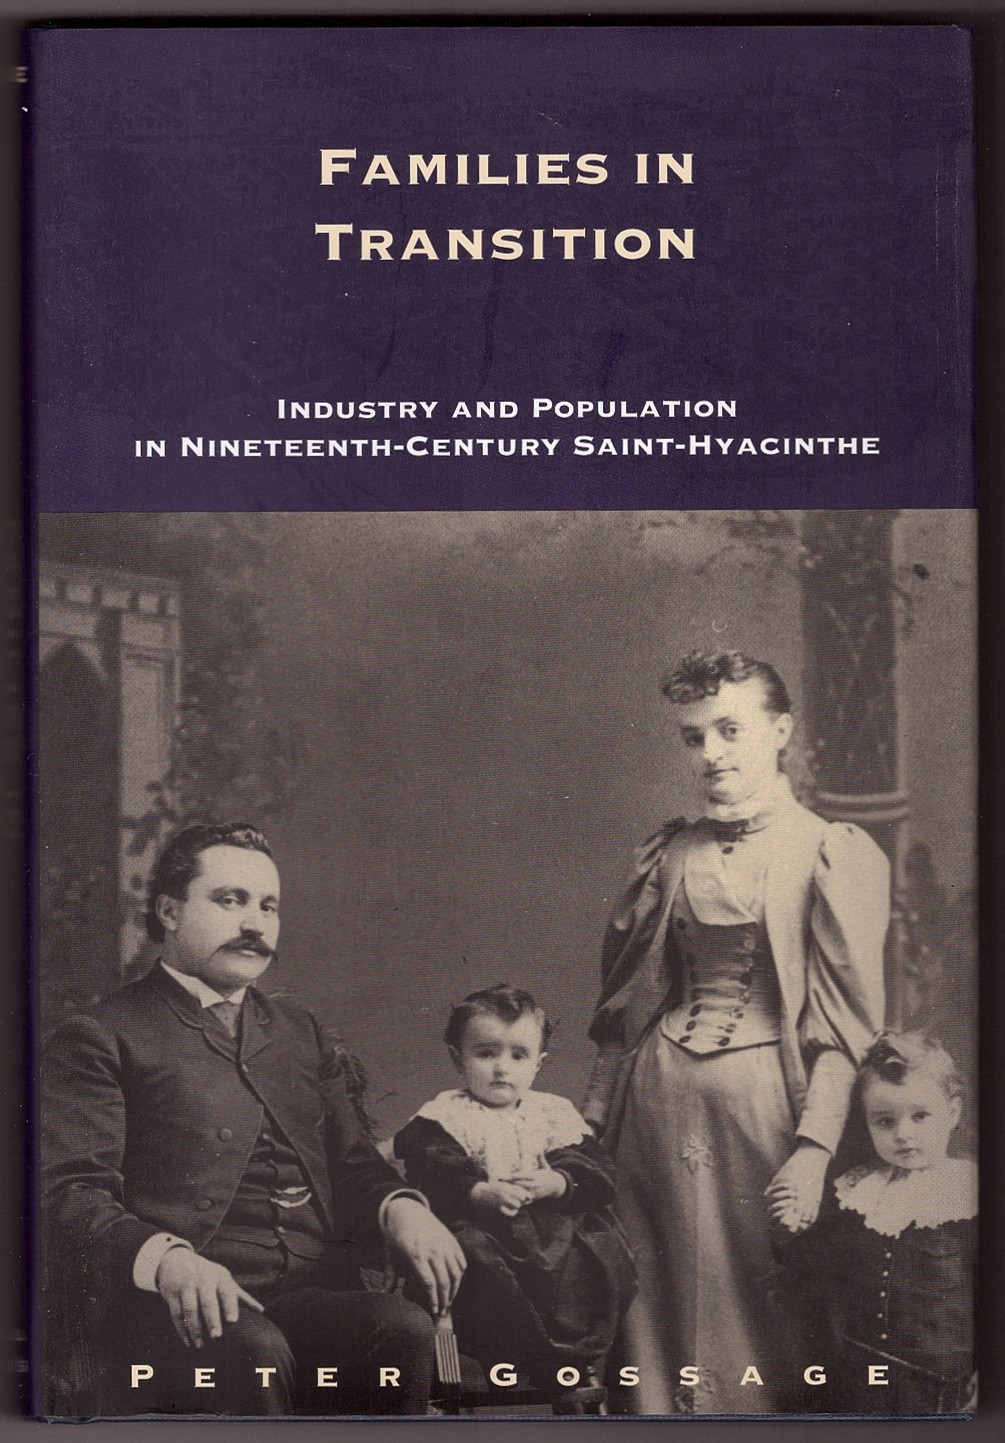 GOSSAGE, PETER - Families in Transition Industry and Population in Nineteenth-Century Saint